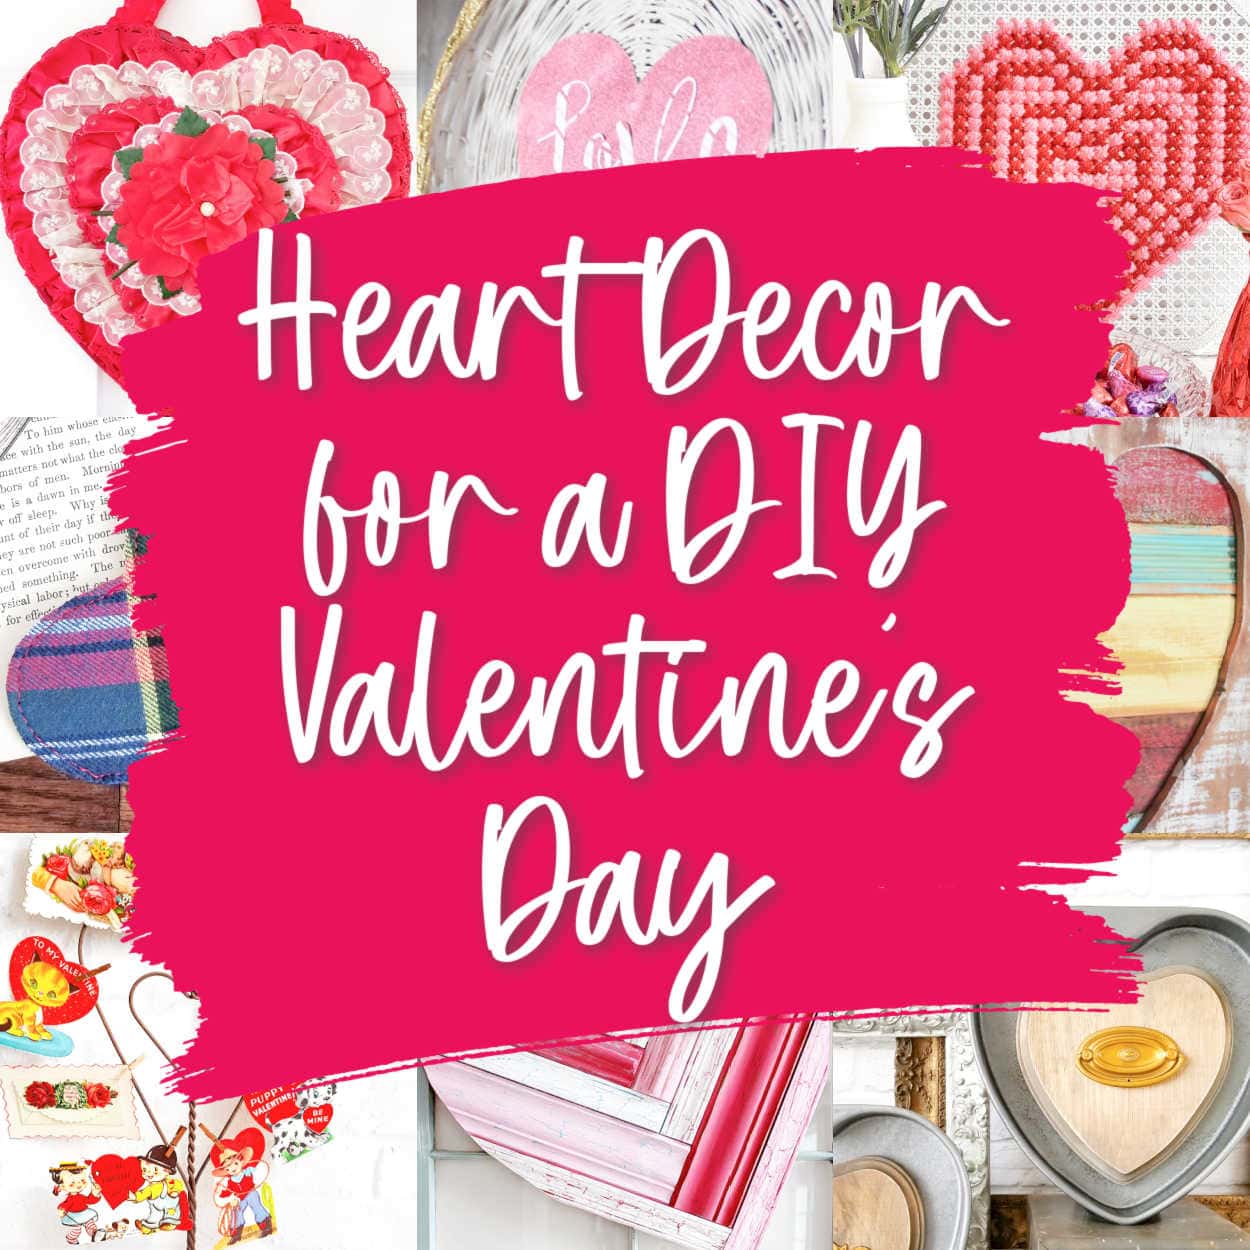 Upcycling Ideas for Heart Decor- Just in Time for Valentine's Day!